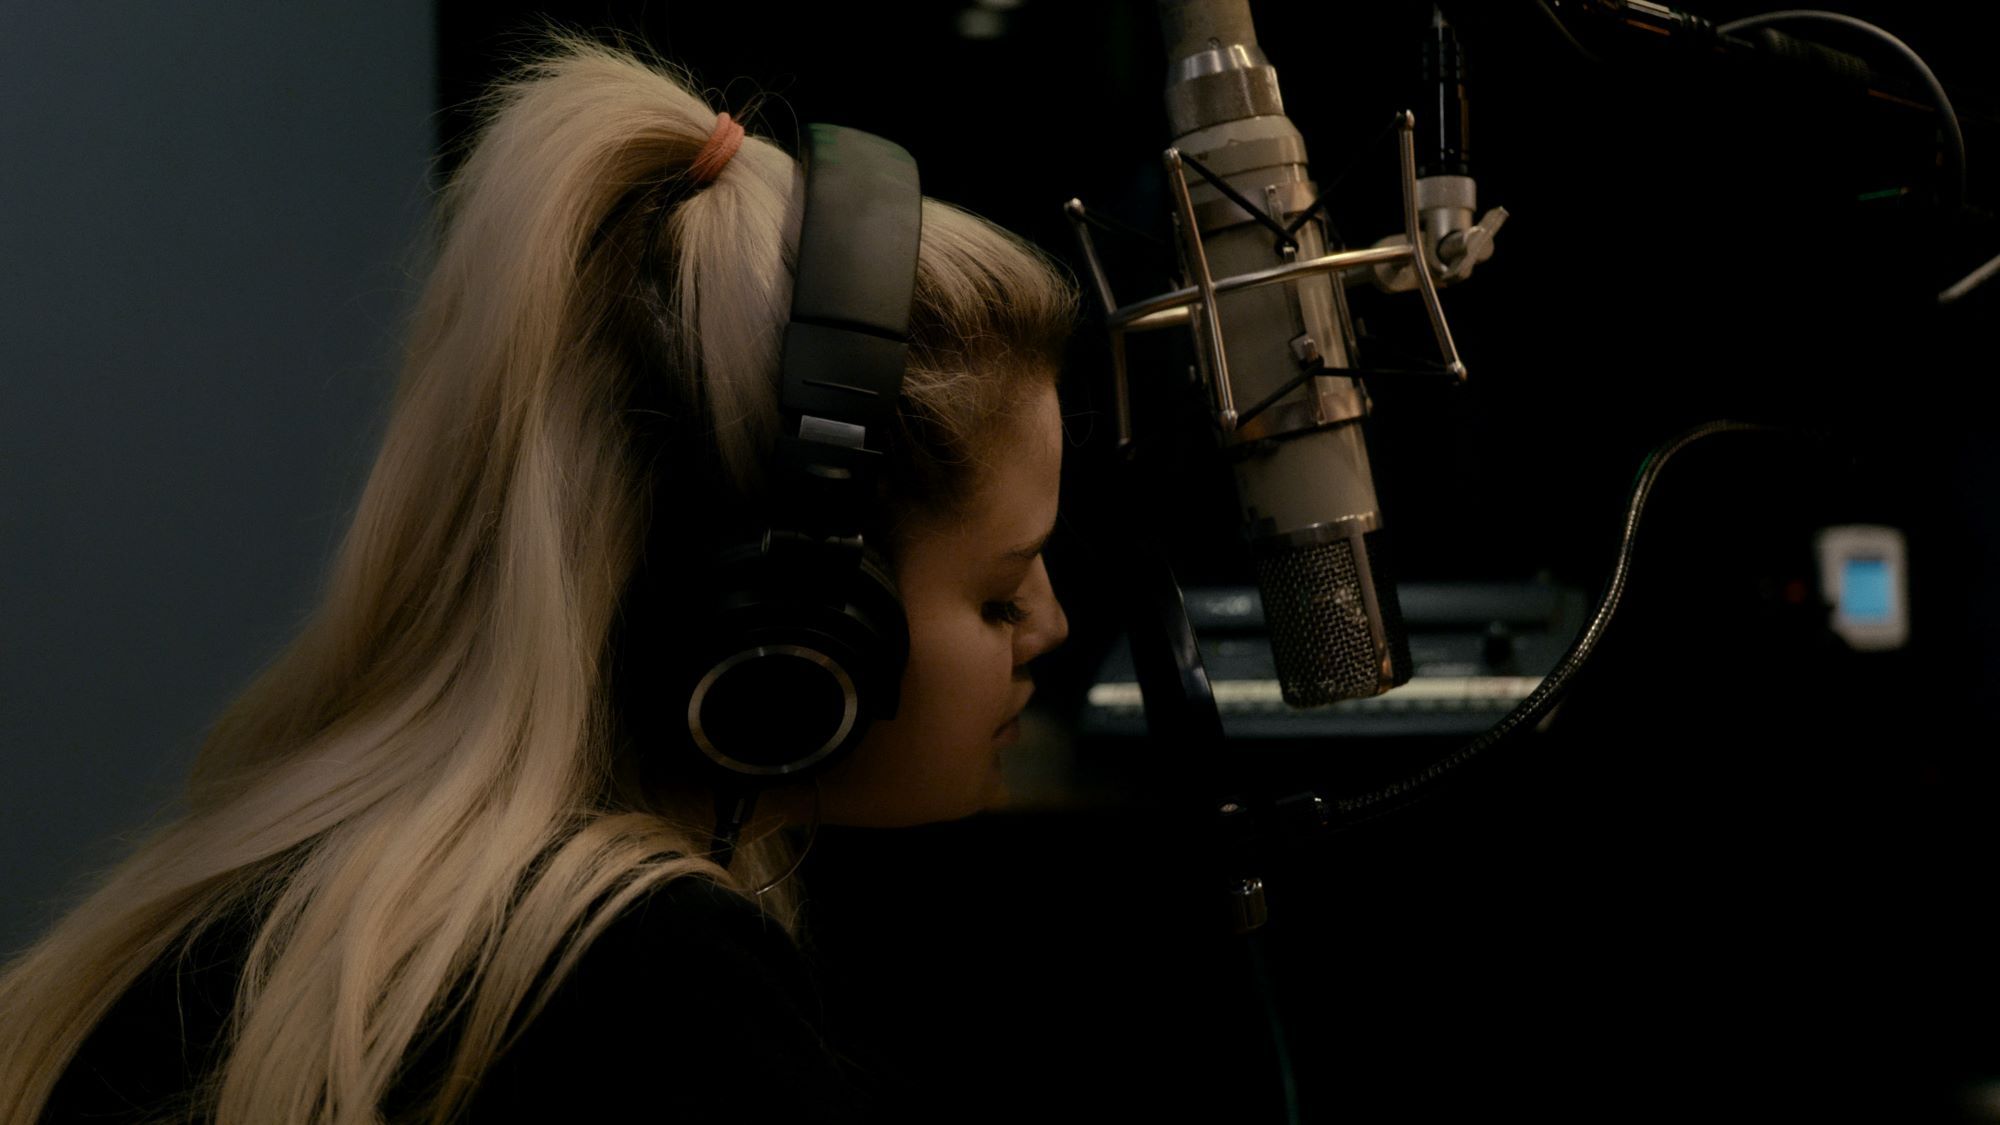 Selena Gomez My Mind and Me, Gomez with blonde hair singing into mic